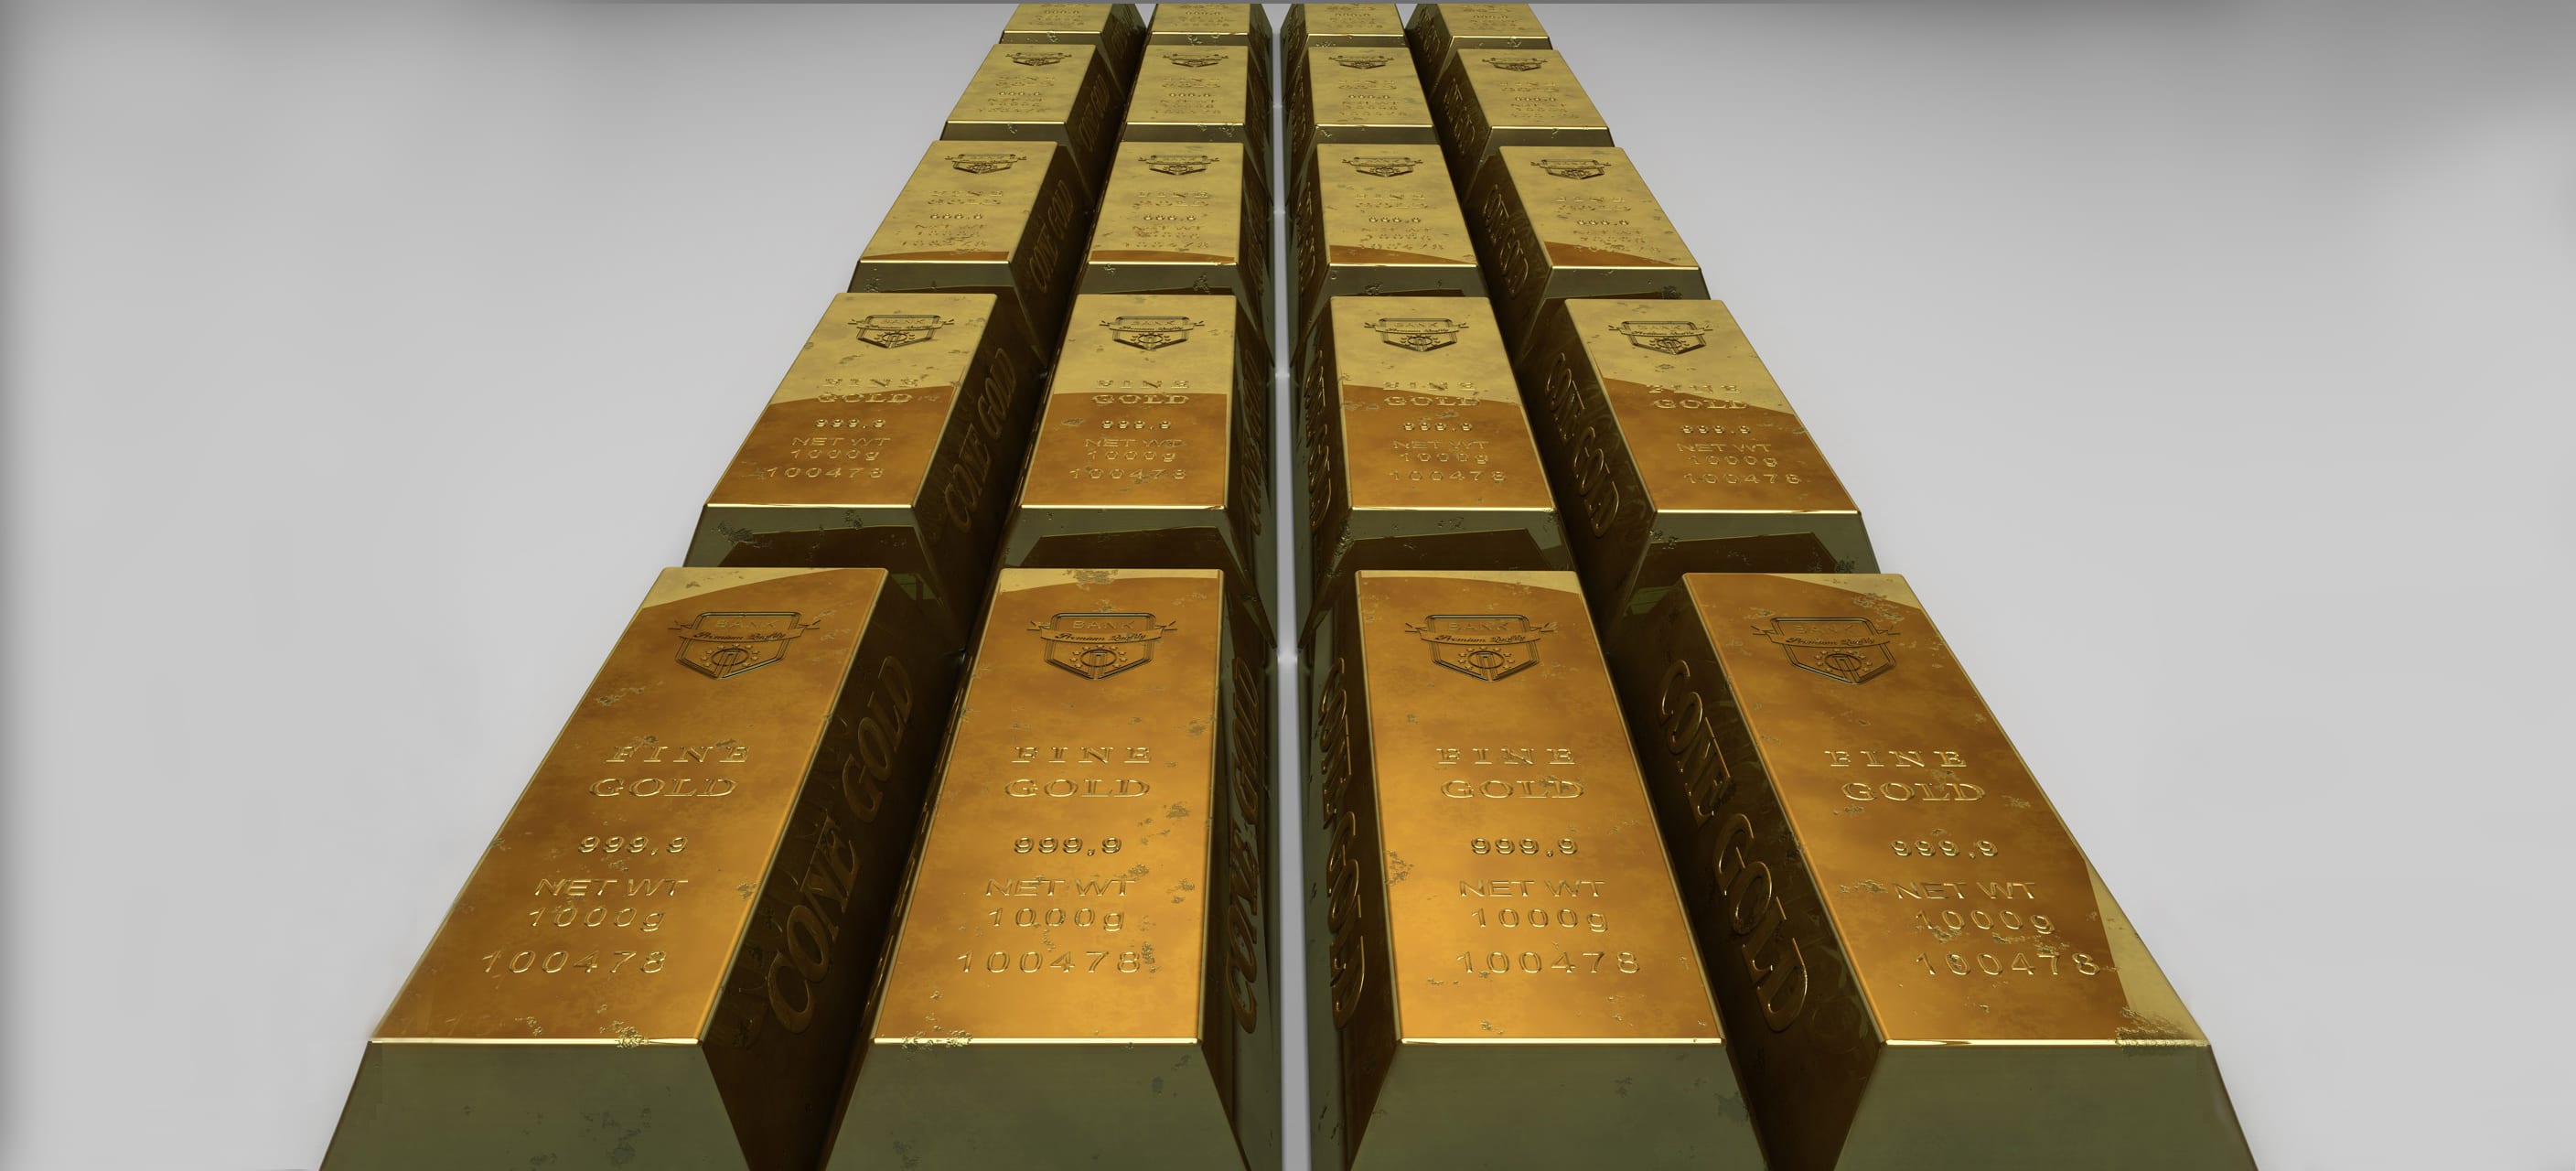 BitGold Enables Gold Buying for US Residents, Shares Rise 16%